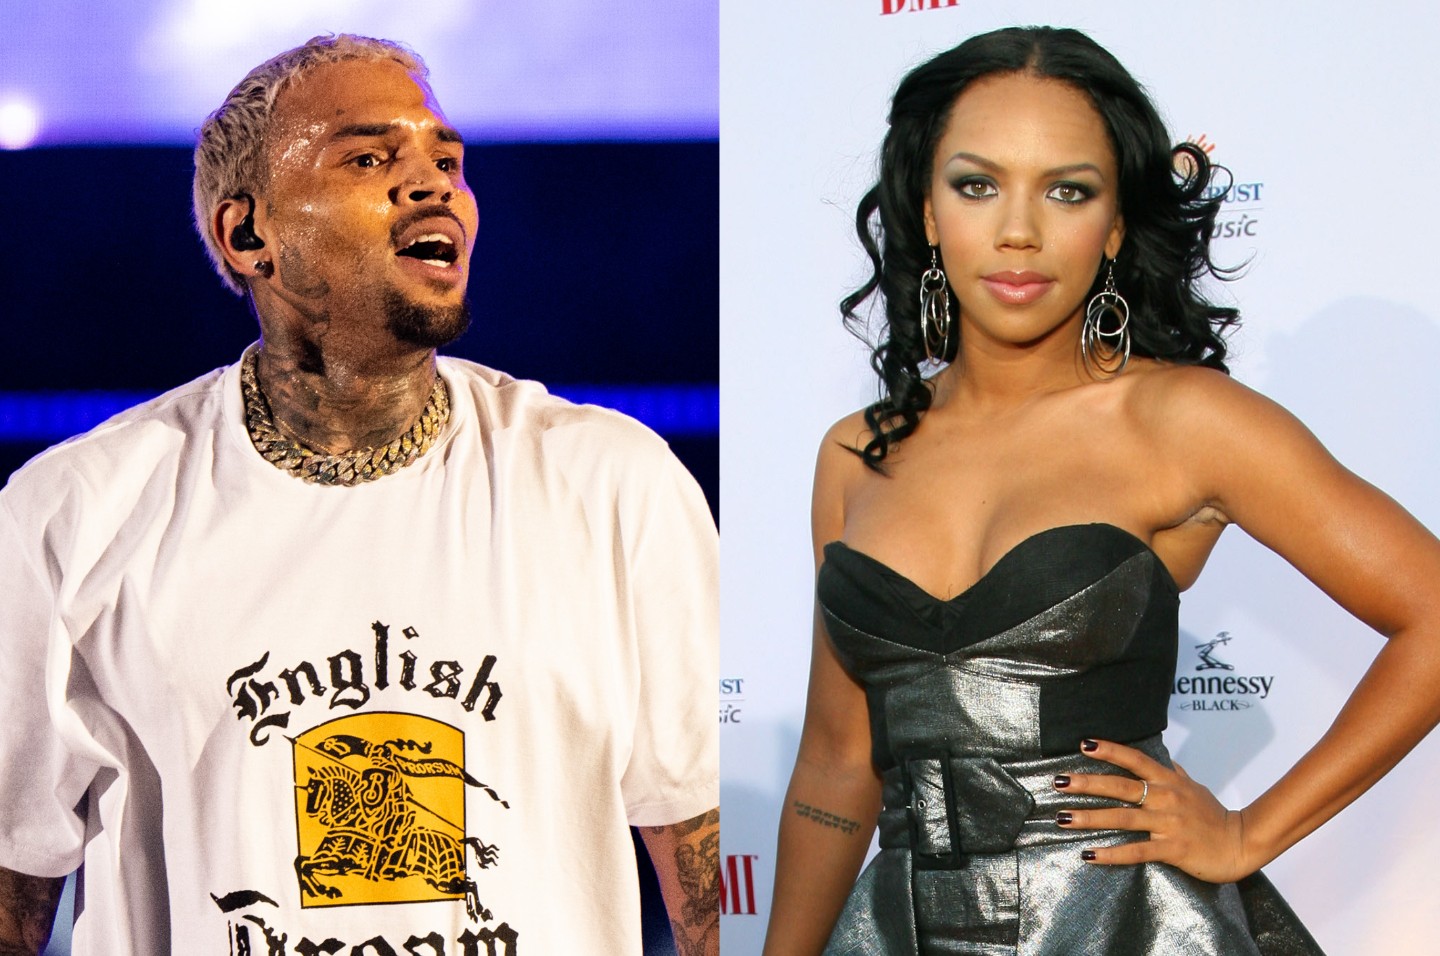 Chris Brown Shades Kiely Williams After She Brings Up Abuse Past